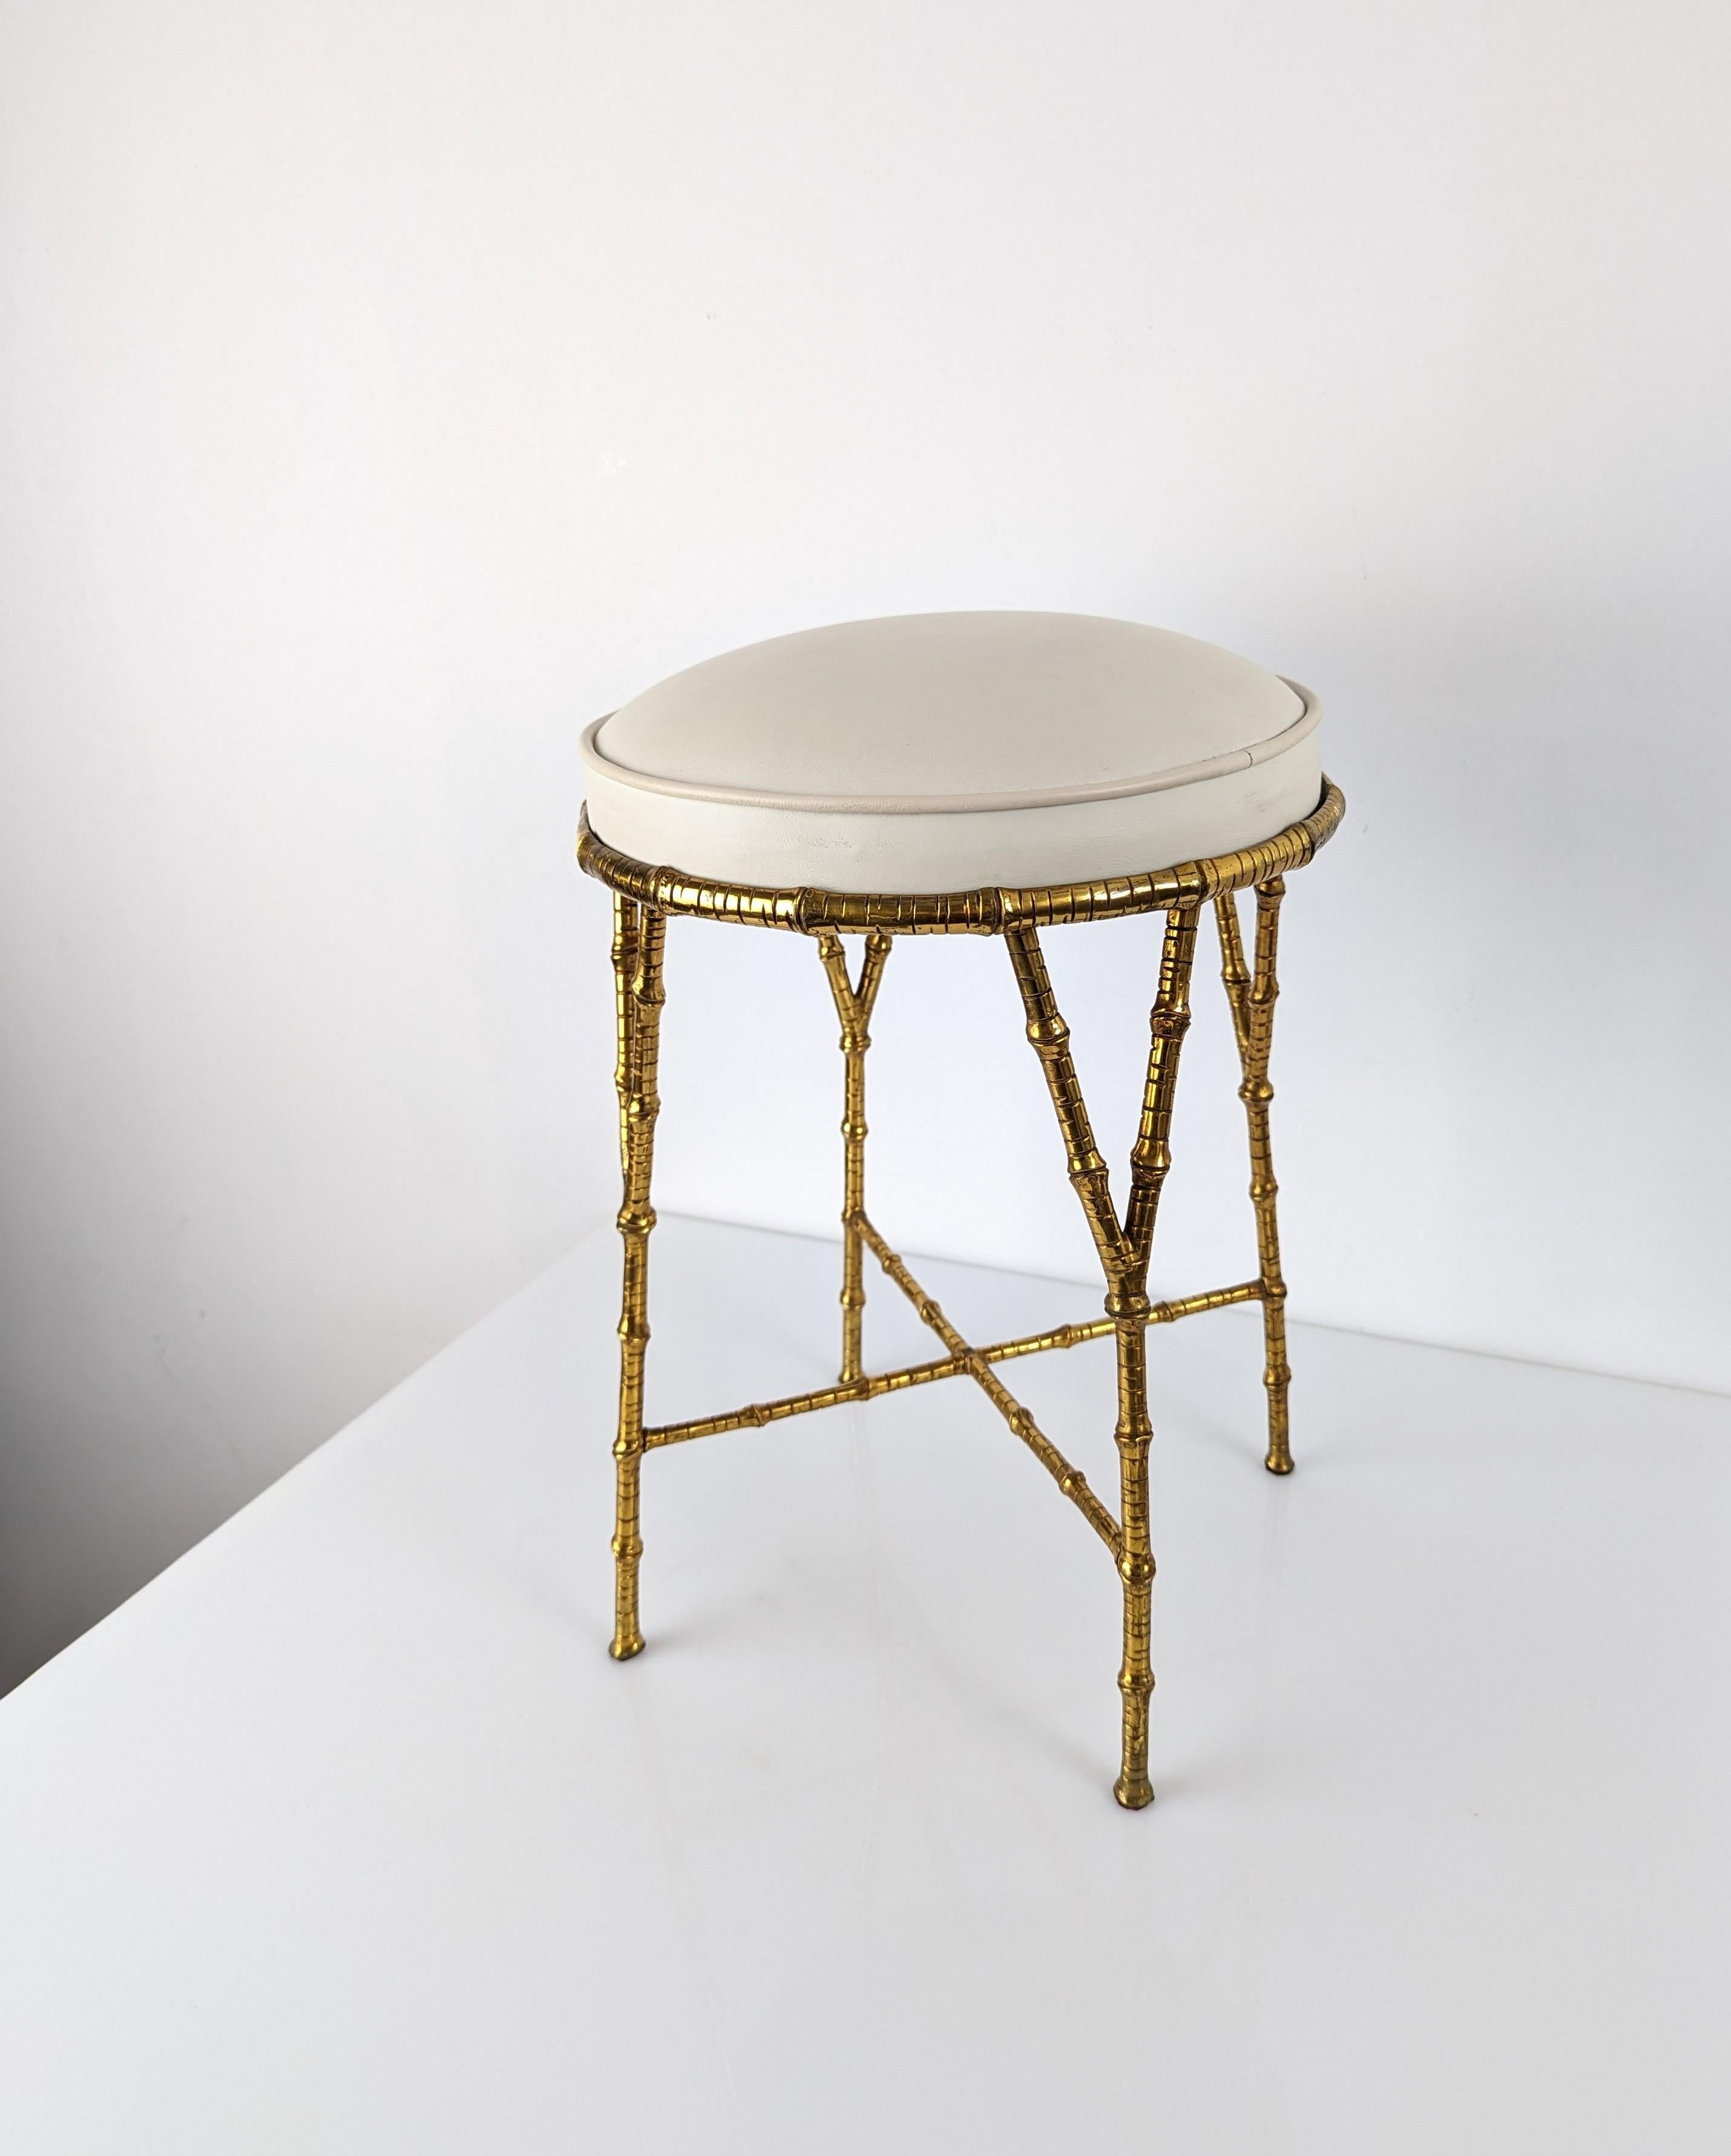 Elegant and exclusive stool made of a precious brass bamboo attributed to the style and quality of the best Maison Bagues designs. A super decorative piece that accompanies and enhances any room.